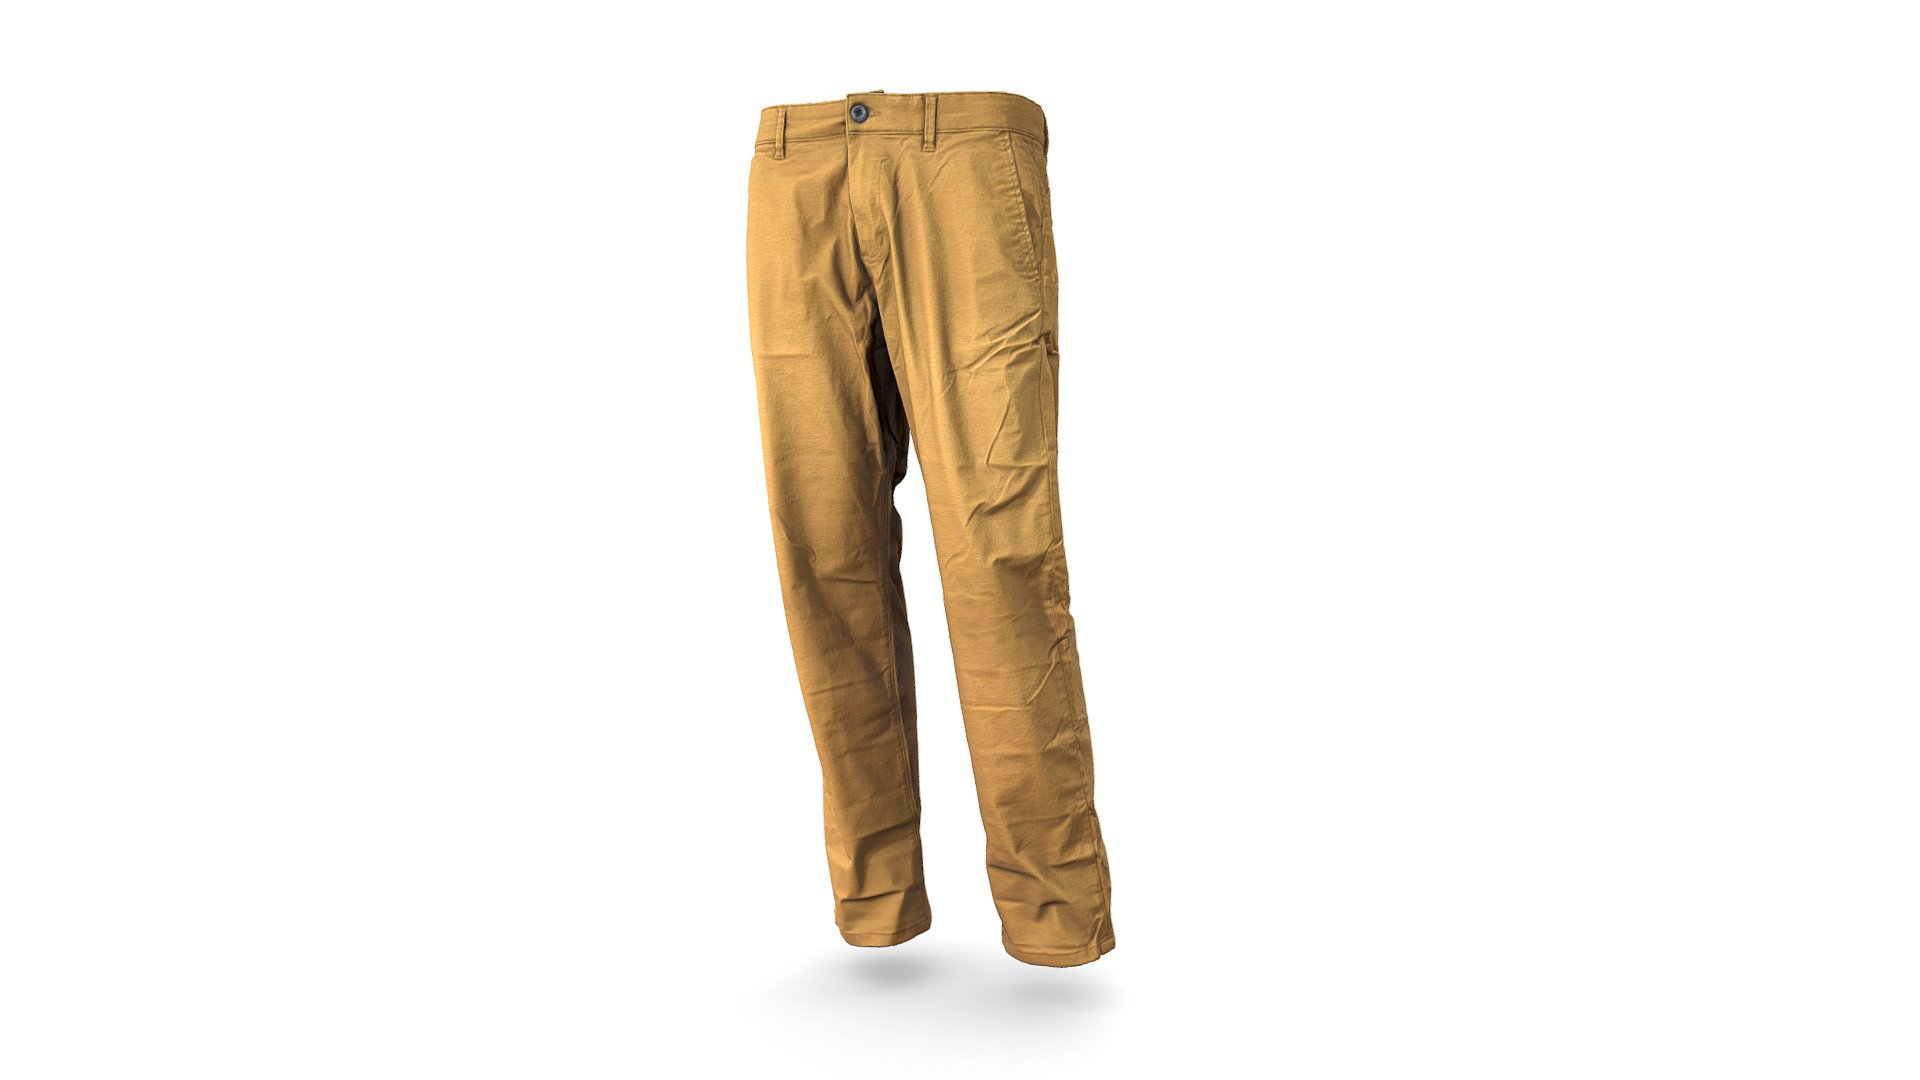 Realistic high detailed Trousers model with high resolution textures. Model created by our unique semi-automatic scanning technology

Optimized for 3D web and AR / VR

=======FEATURES===========

The units of measurement during the creation process were milimeters.
Clean and optimized topology is used for maximum polygon efficiency. 
This model consists of 1 meshes.
All objects have fully unwrapped UVs.
The model has 2 materials Includes high detailed normal map

Includes High detail 4096x4096 .png textures (diffuse (base color), Roughness, Metallness, Normal)
60k polygons - Esprit Chinos - Buy Royalty Free 3D model by VRModelFactory 3d model